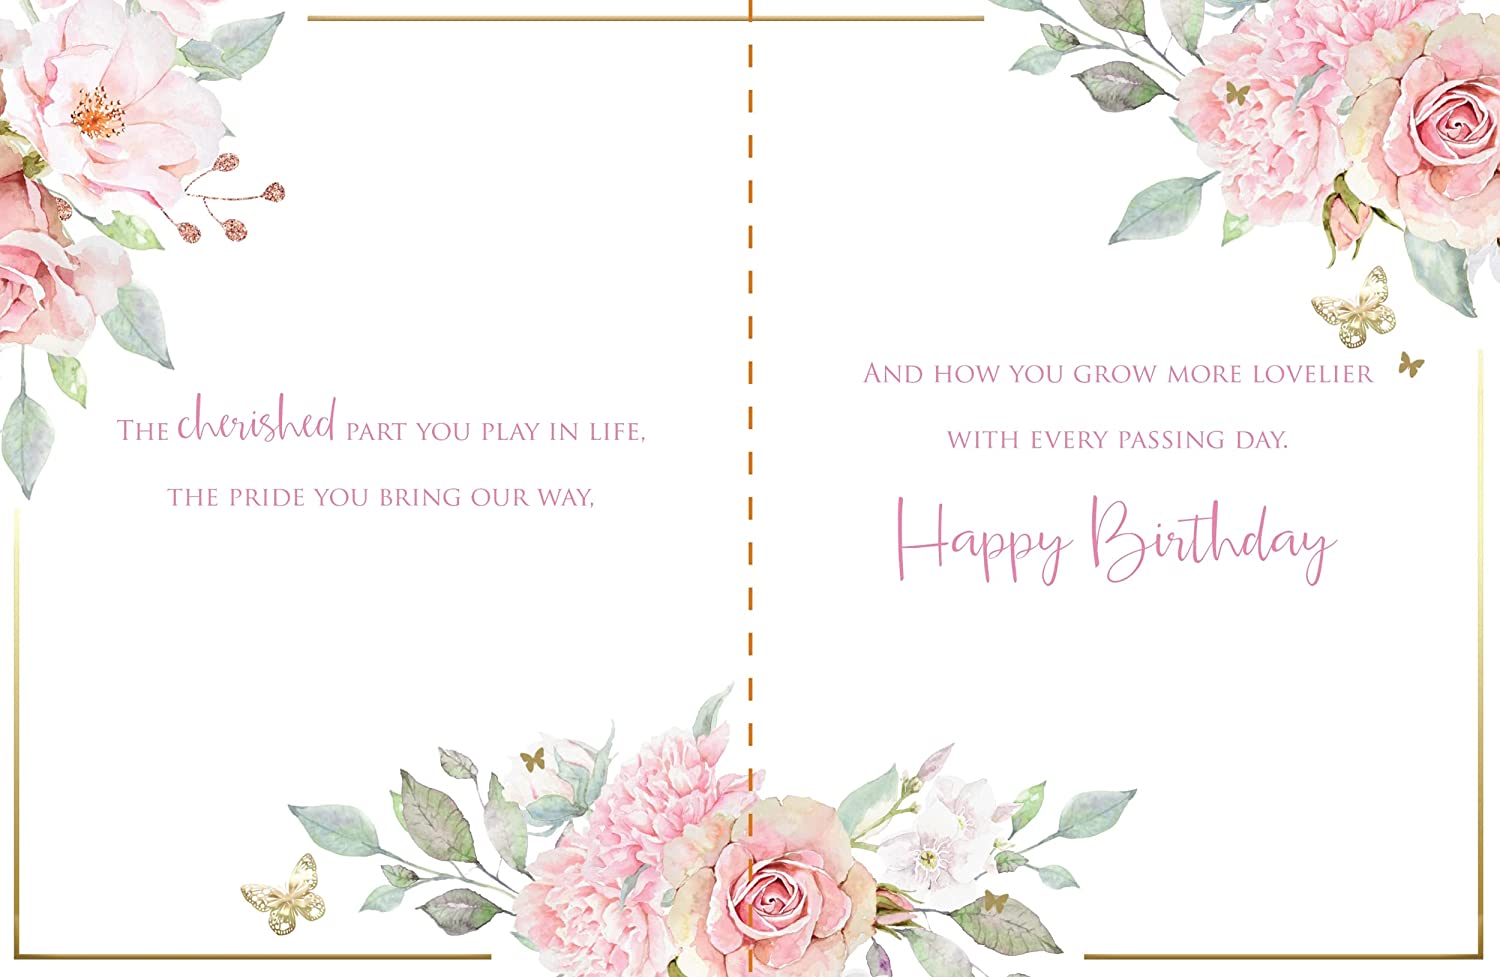 Granddaughter Birthday Card - Pretty Roses For Lovely You